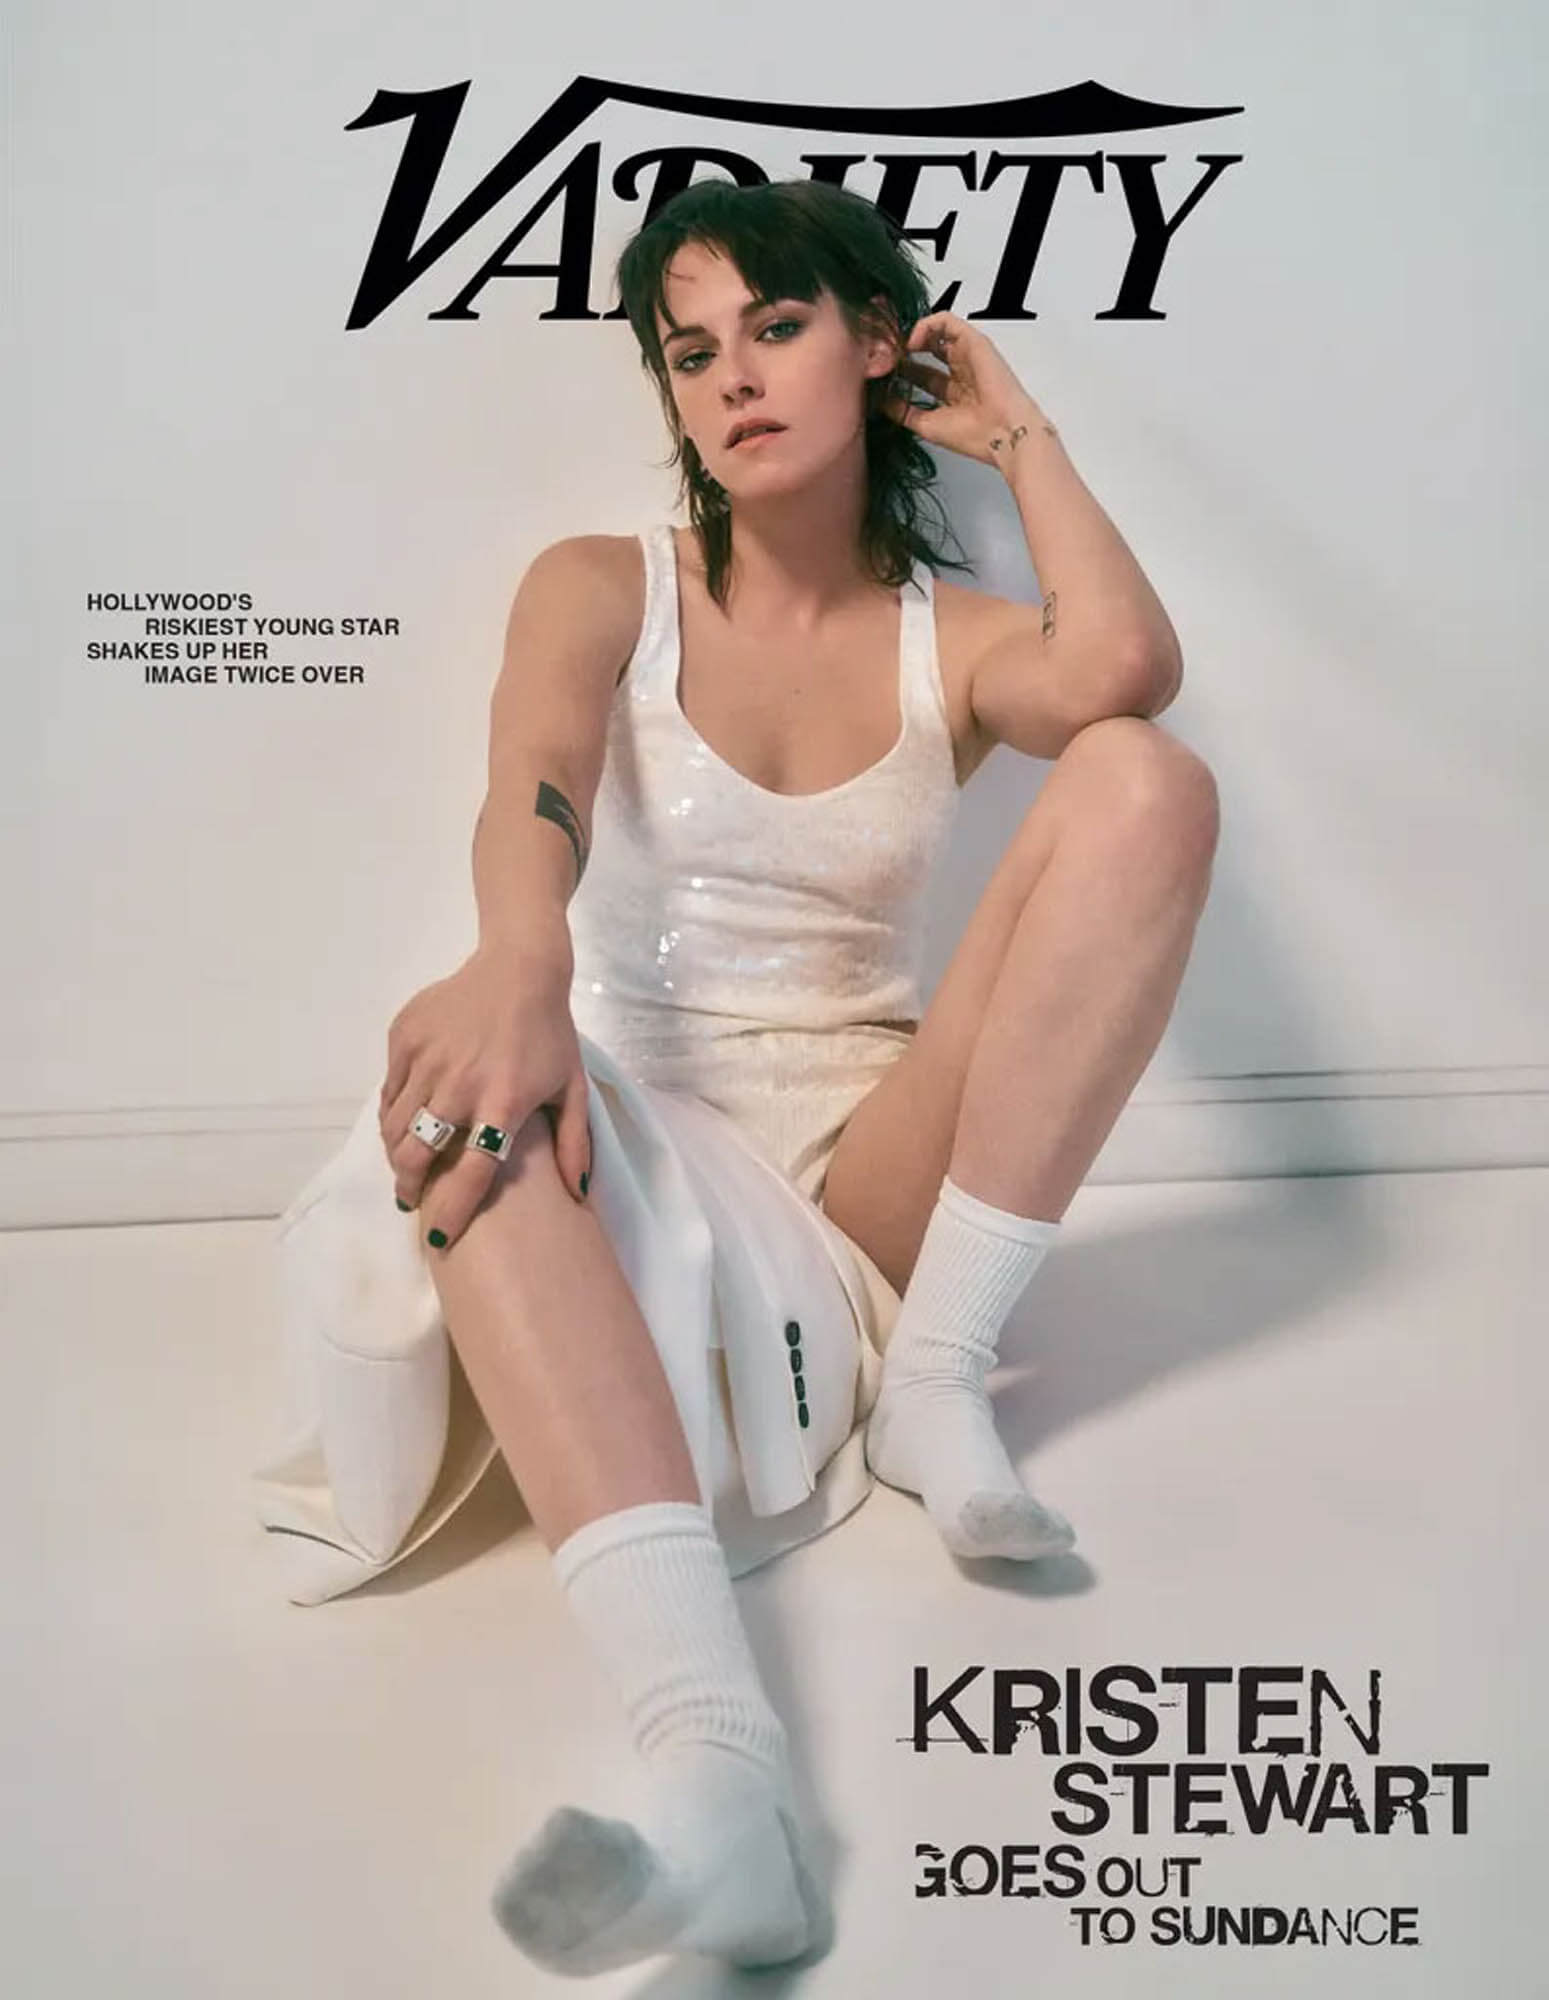 Kristen Stewart's Variety feature reminds us that as successful and